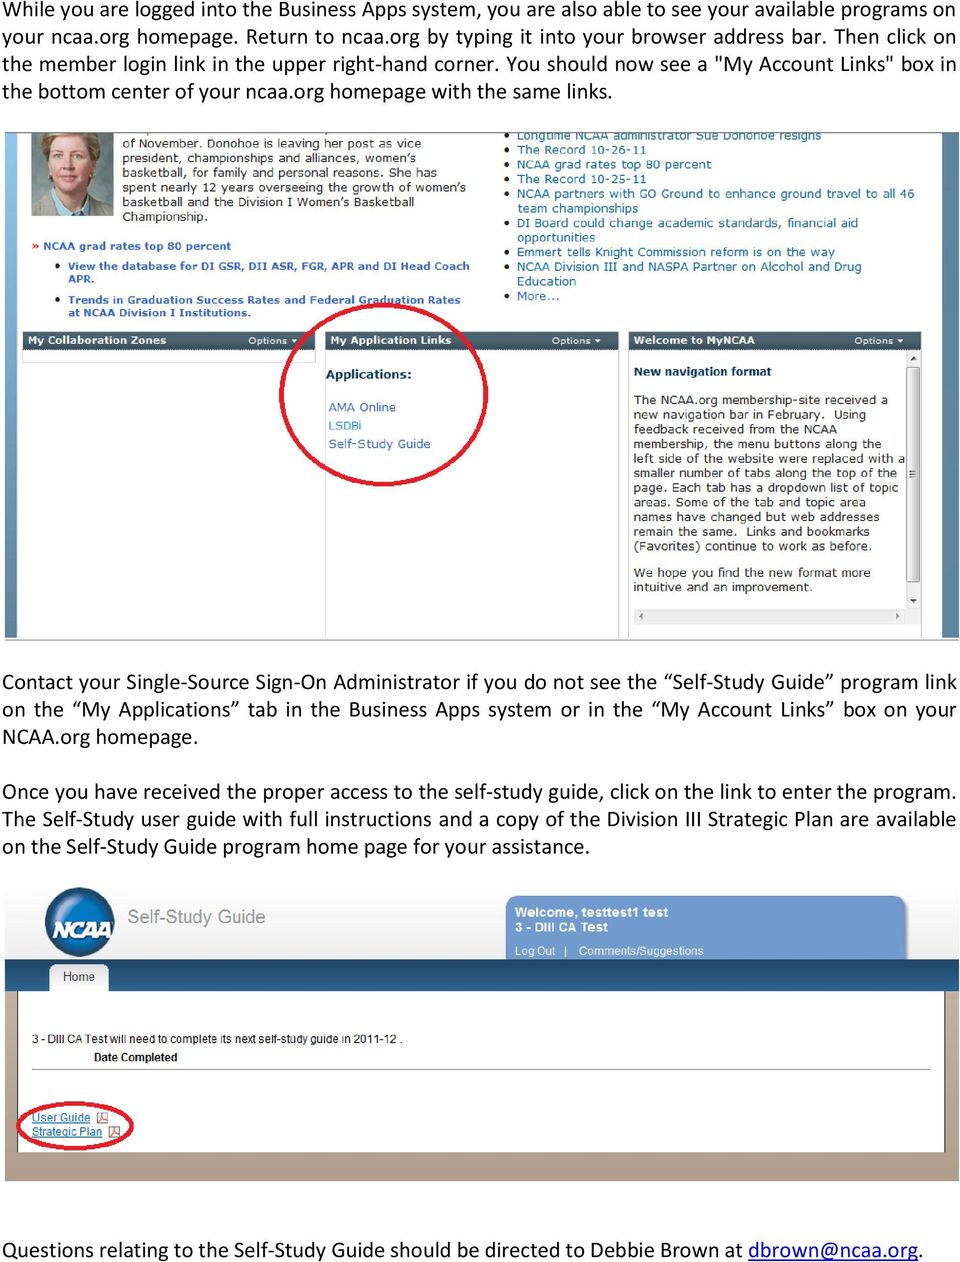 Contact your Single-Source Sign-On Administrator if you do not see the Self-Study Guide program link on the My Applications tab in the Business Apps system or in the My Account Links box on your NCAA.